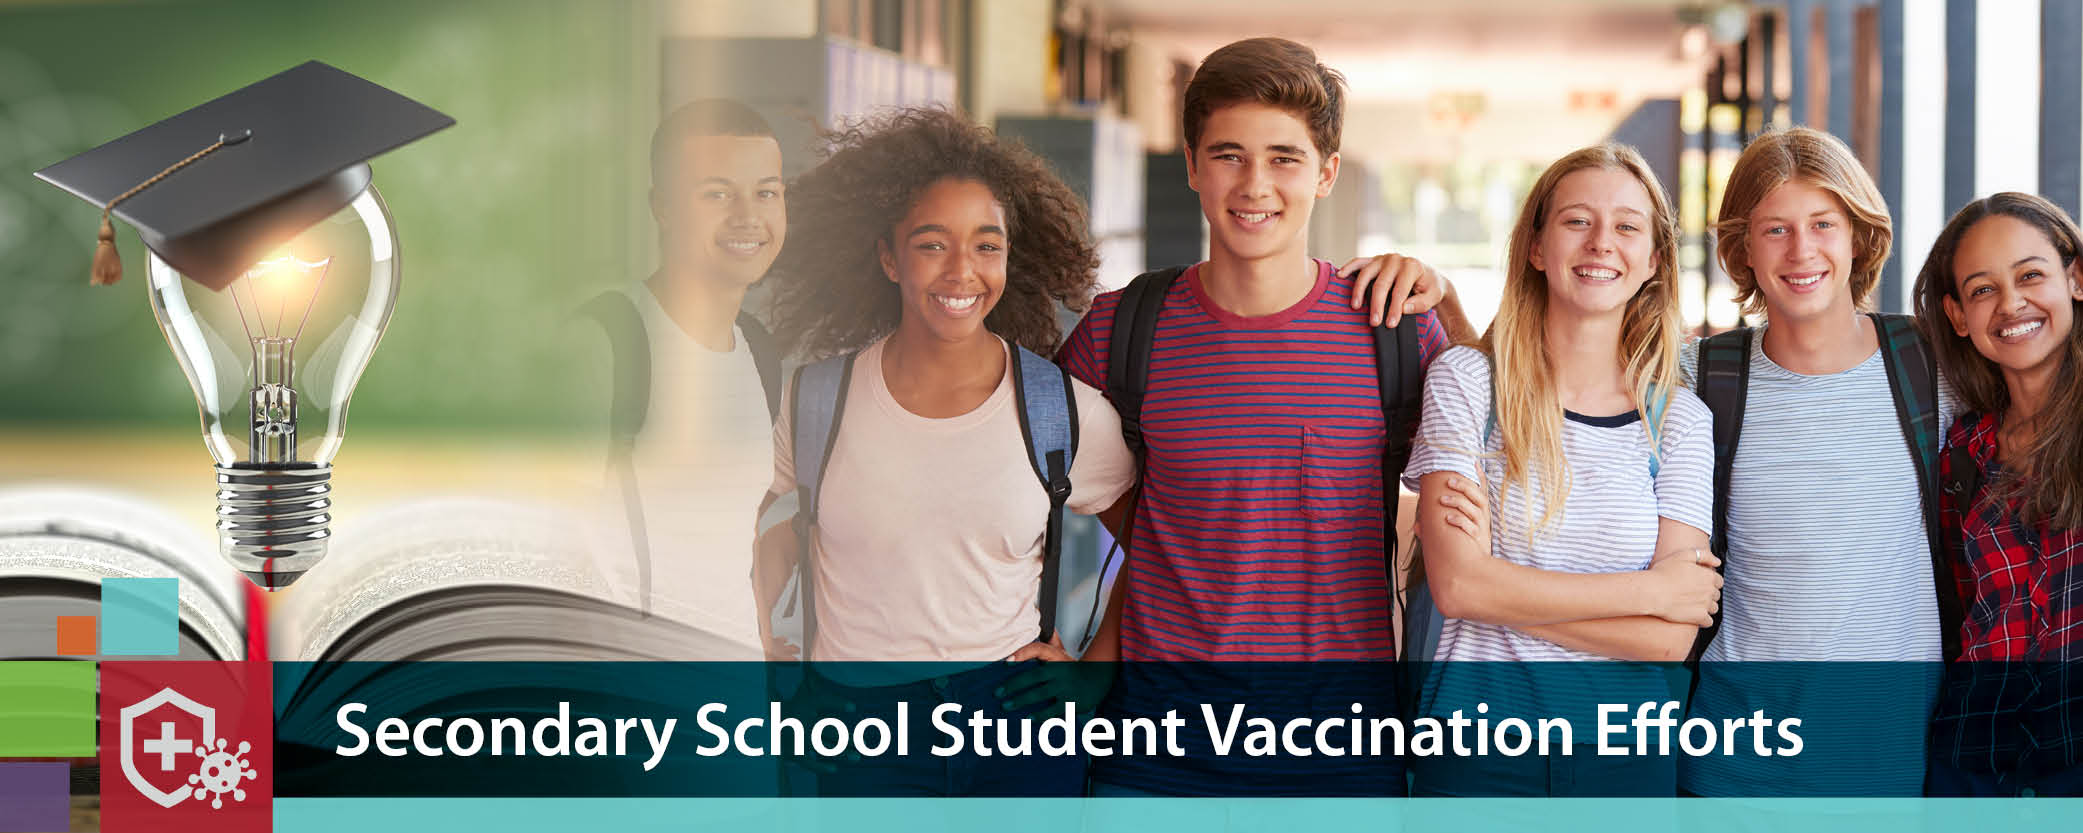 Annual report section banner - Secondary School Student Vaccination Efforts